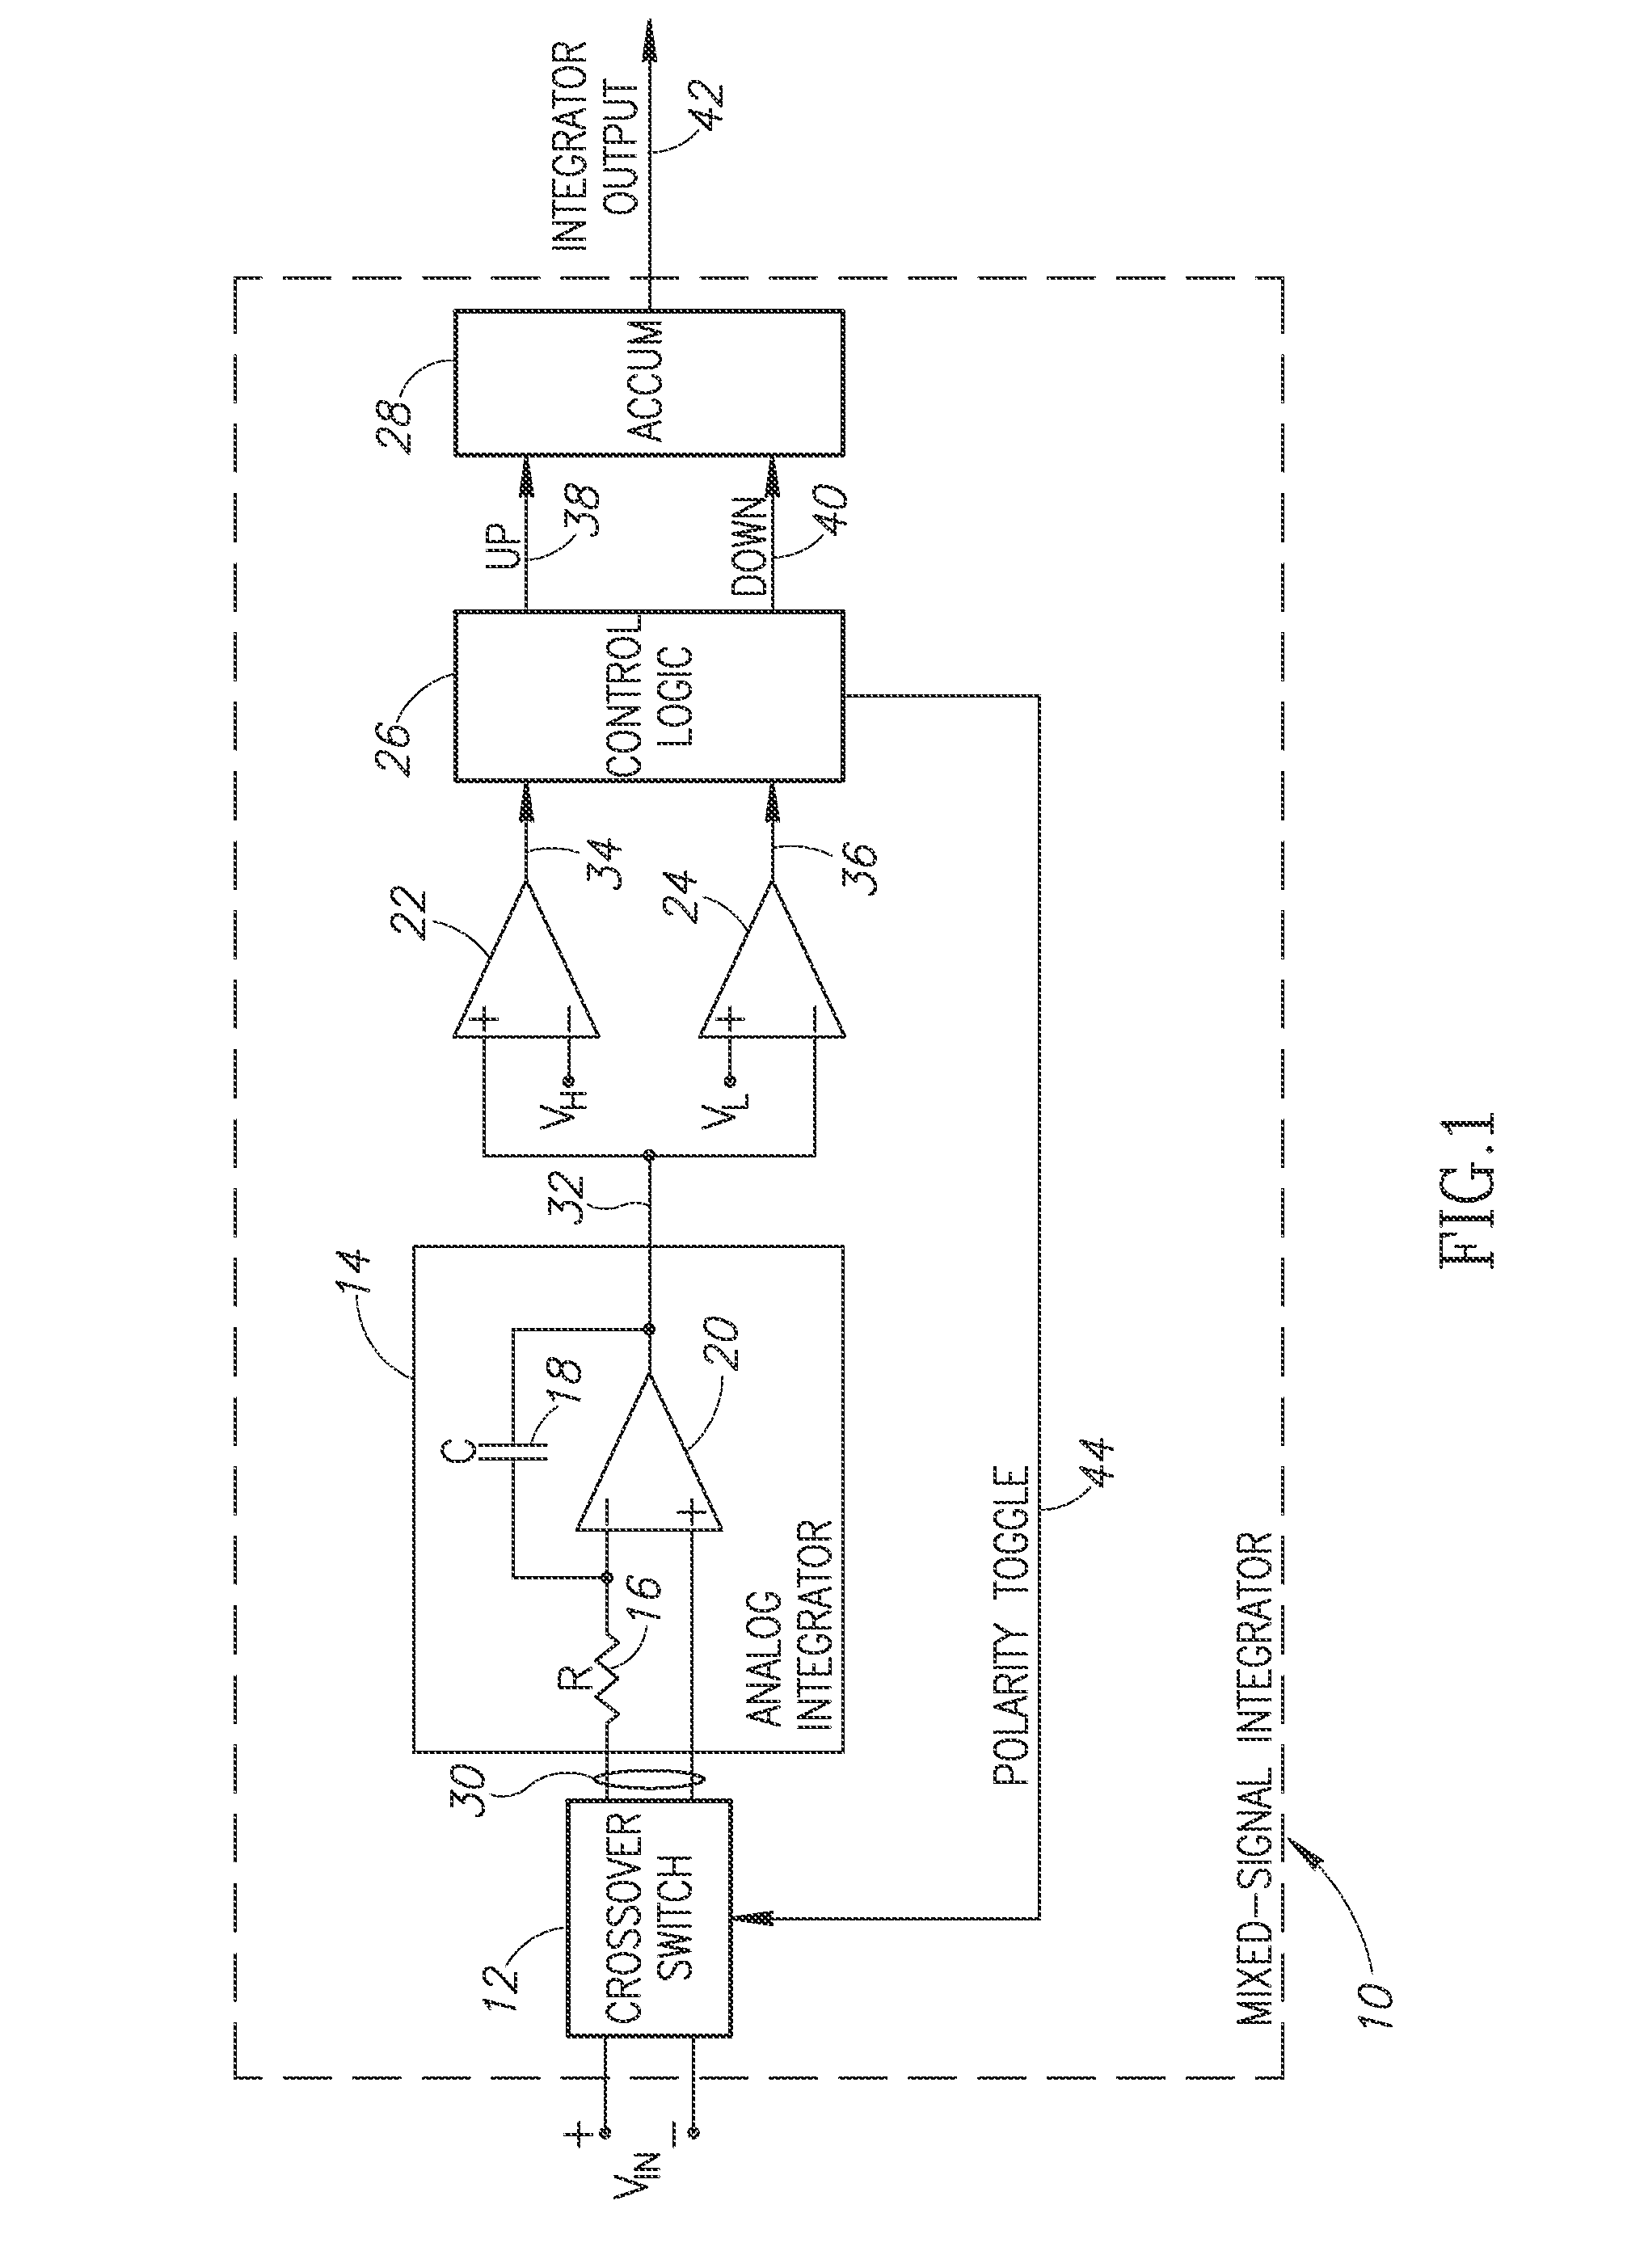 Mixed Signal Integrator Incorporating Extended Integration Duration